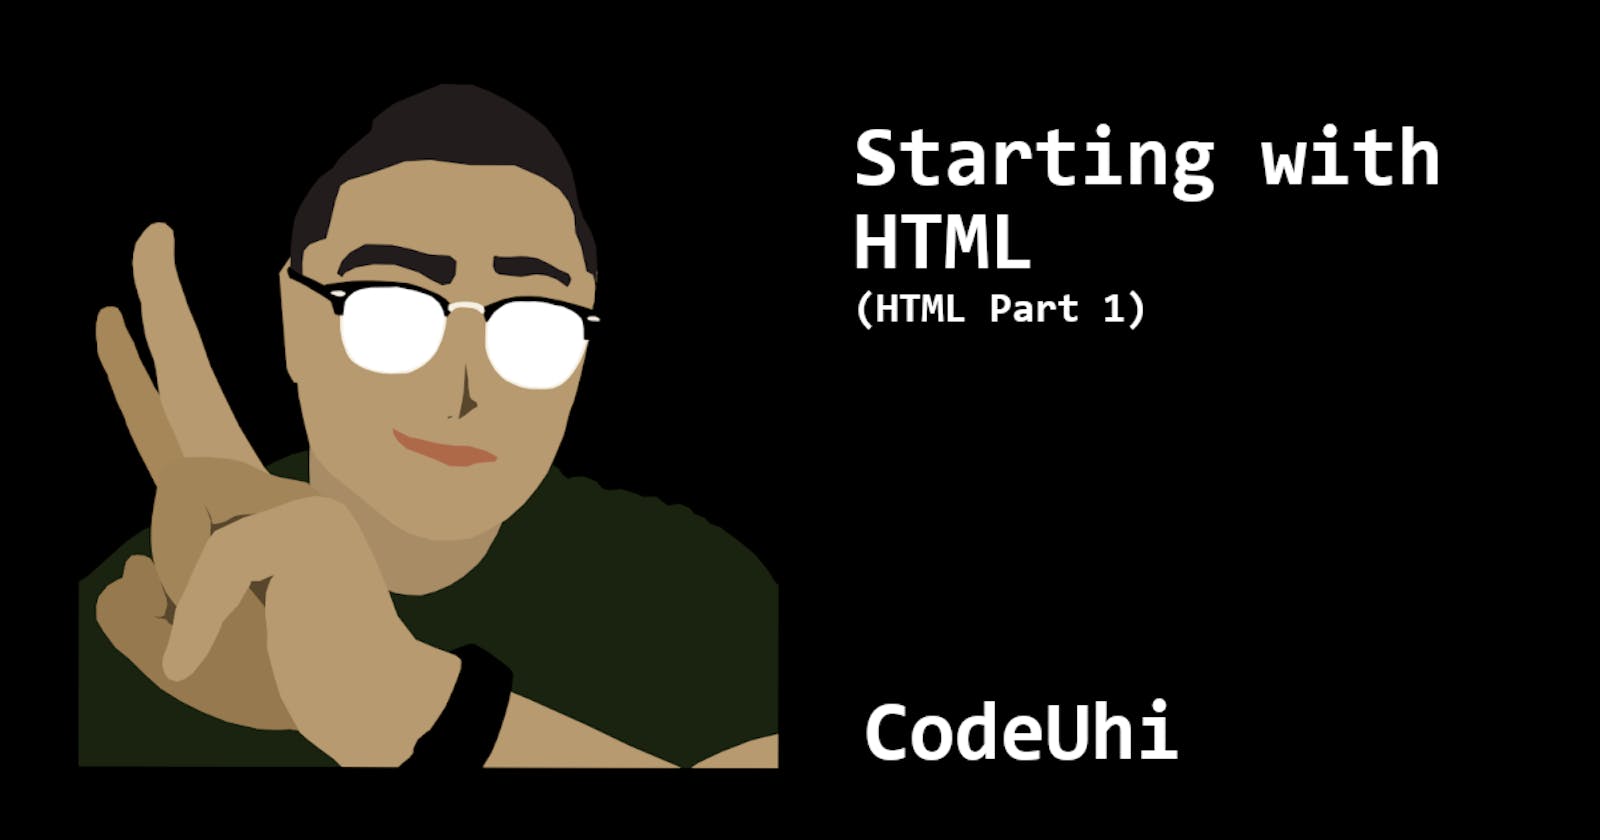 Starting with HTML (HTML Part 1)